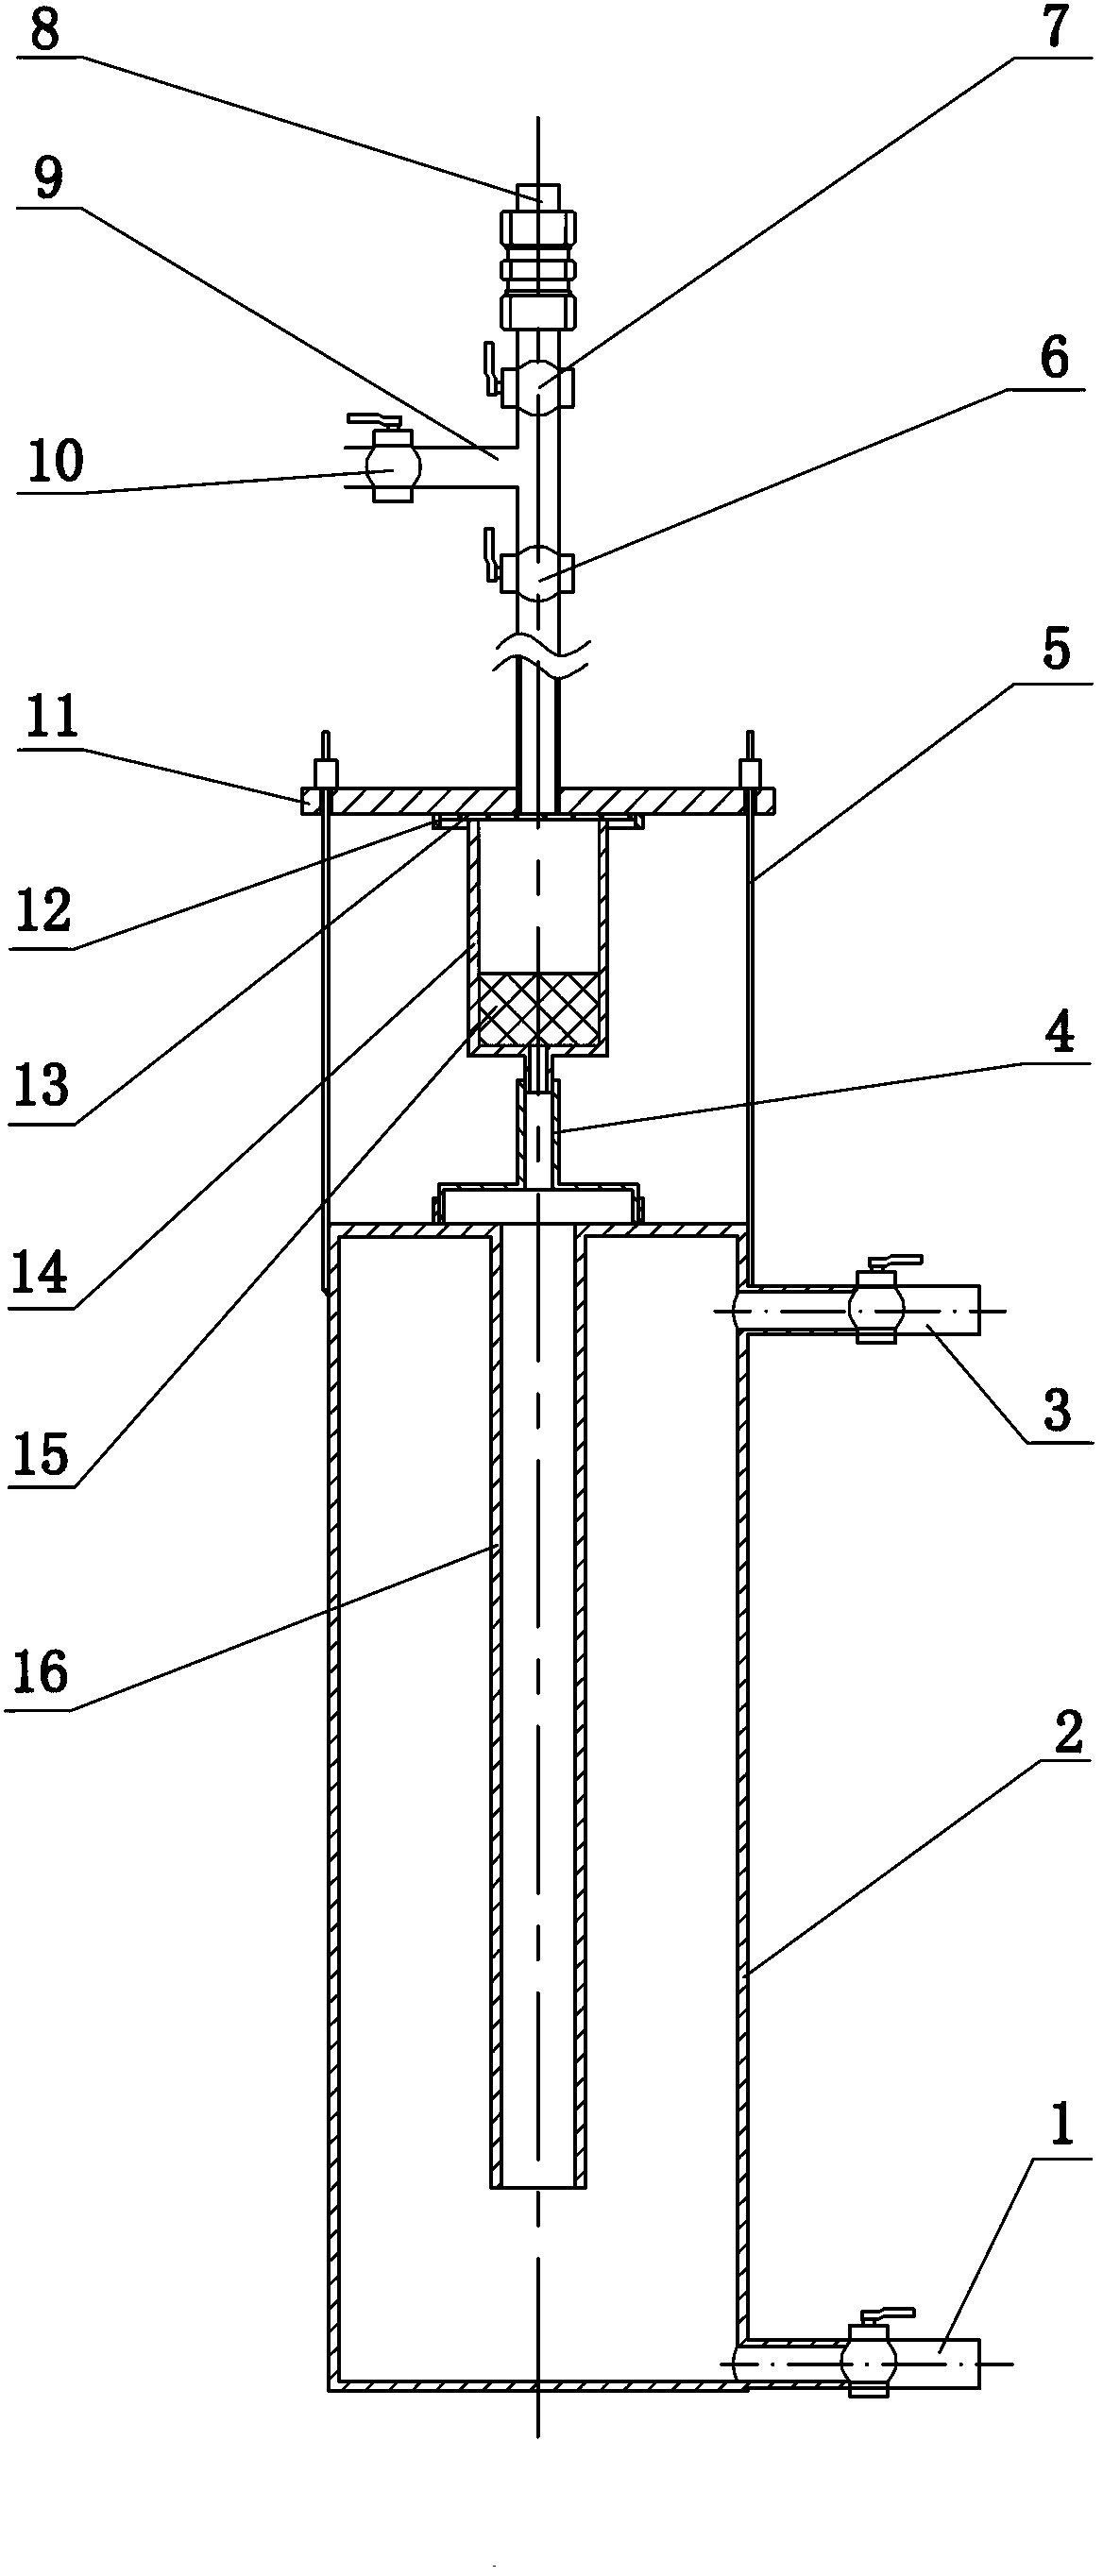 Device for enriching semi-volatile organic compounds in underground water